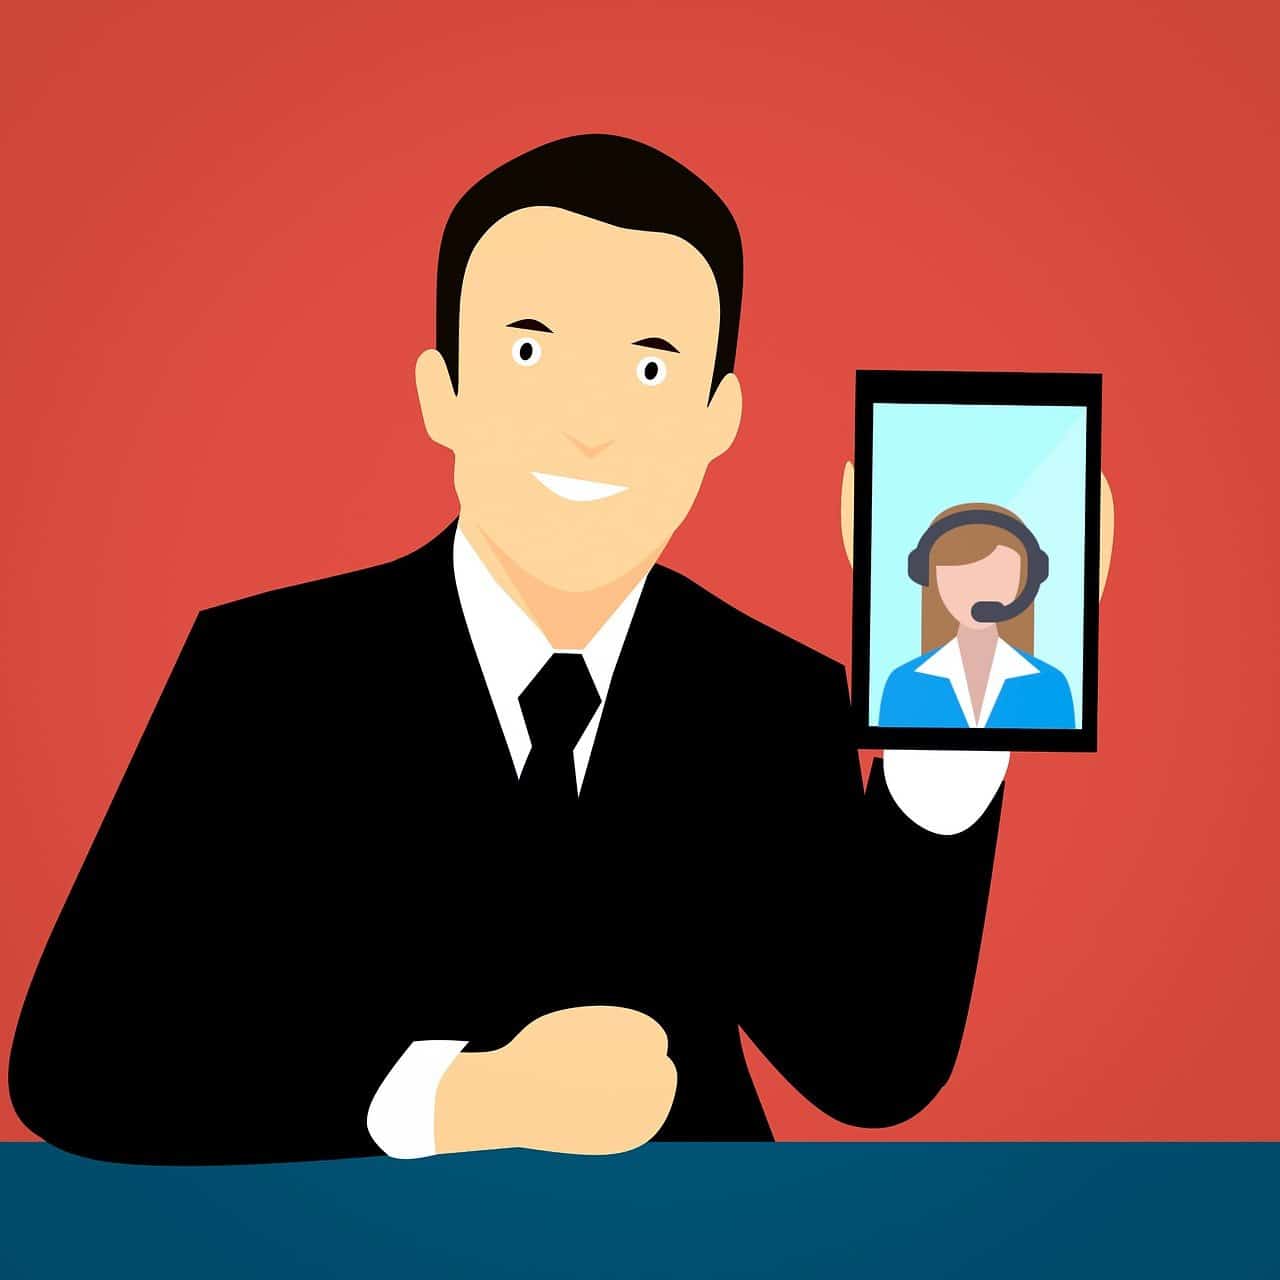 Animated image of a man holding up a cell phone.